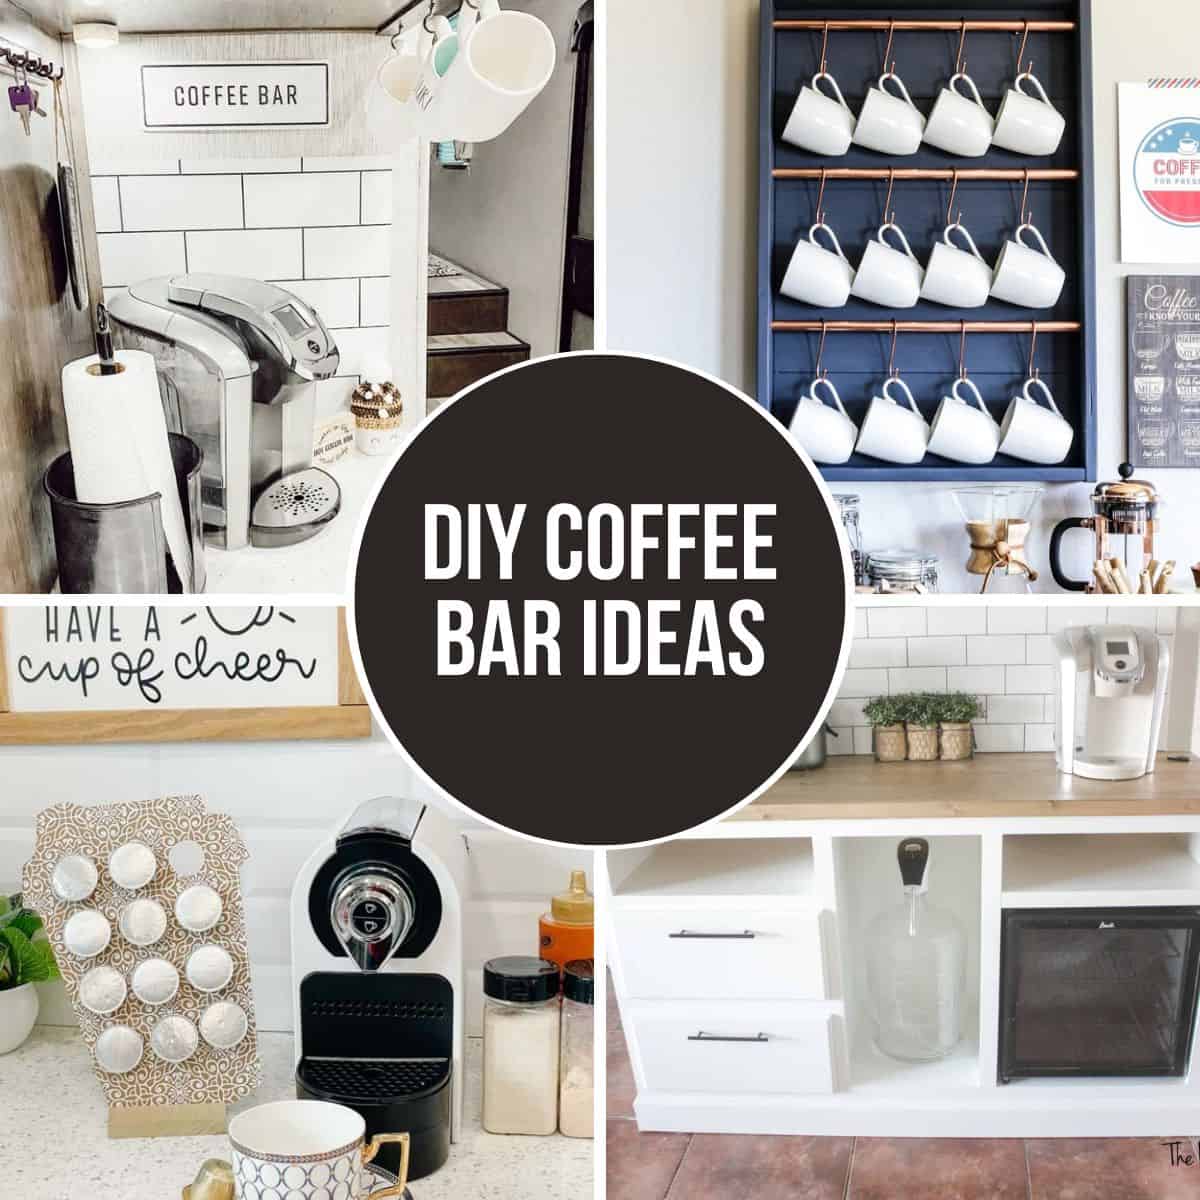 https://www.thehandymansdaughter.com/wp-content/uploads/2022/12/diy-coffee-bar-ideas-The-Handymans-Daughter-featured-image.jpg